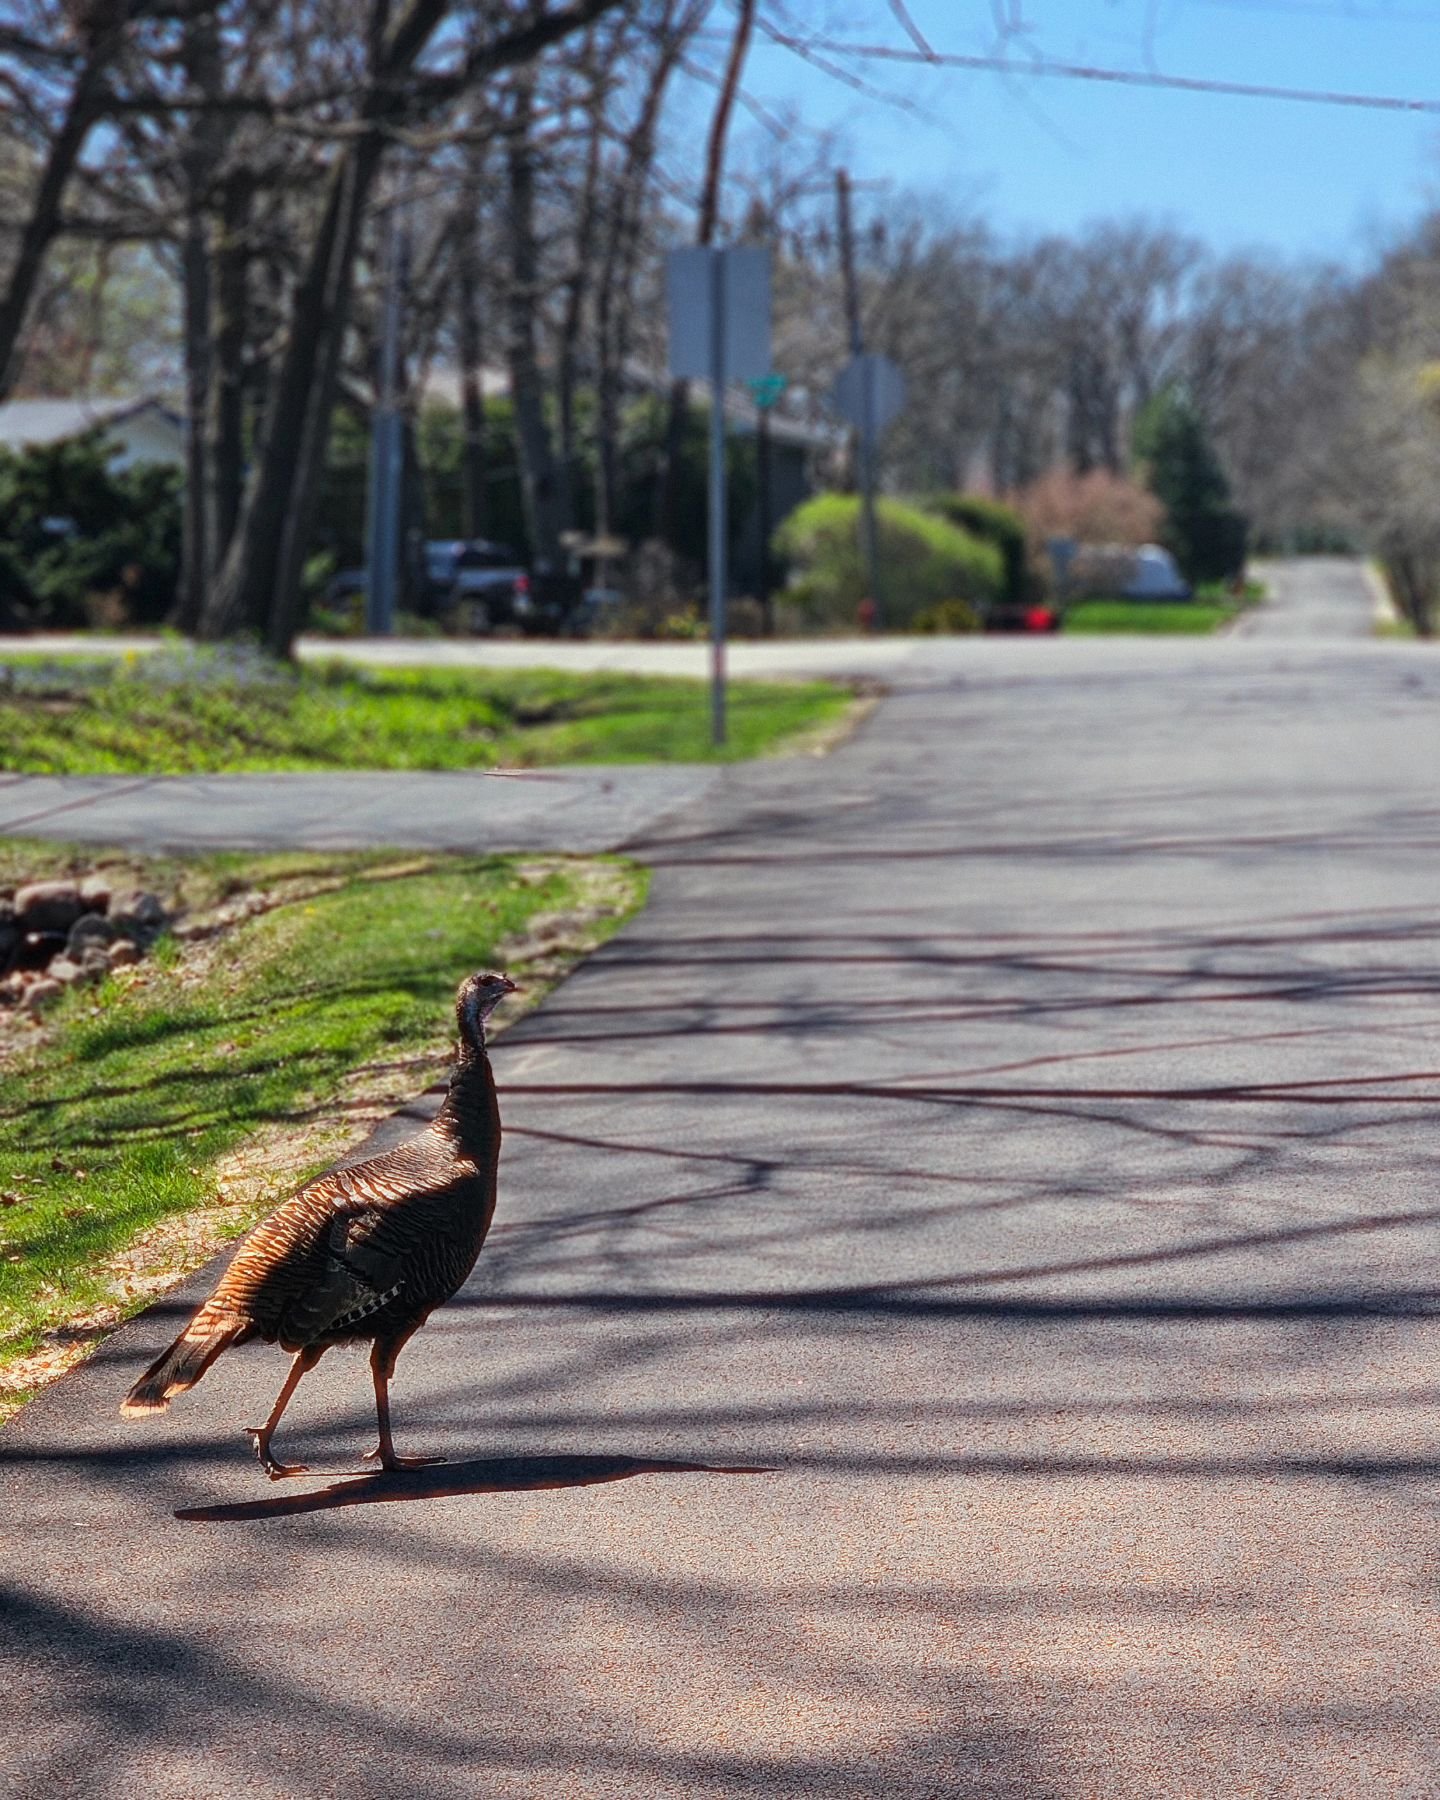 What's that saying about chickens and crossing the road? Oh wait, this is a turkey! #wildturkey #turkey #wildlife #illinois #illinoiswildlife #palospark #lovethepark